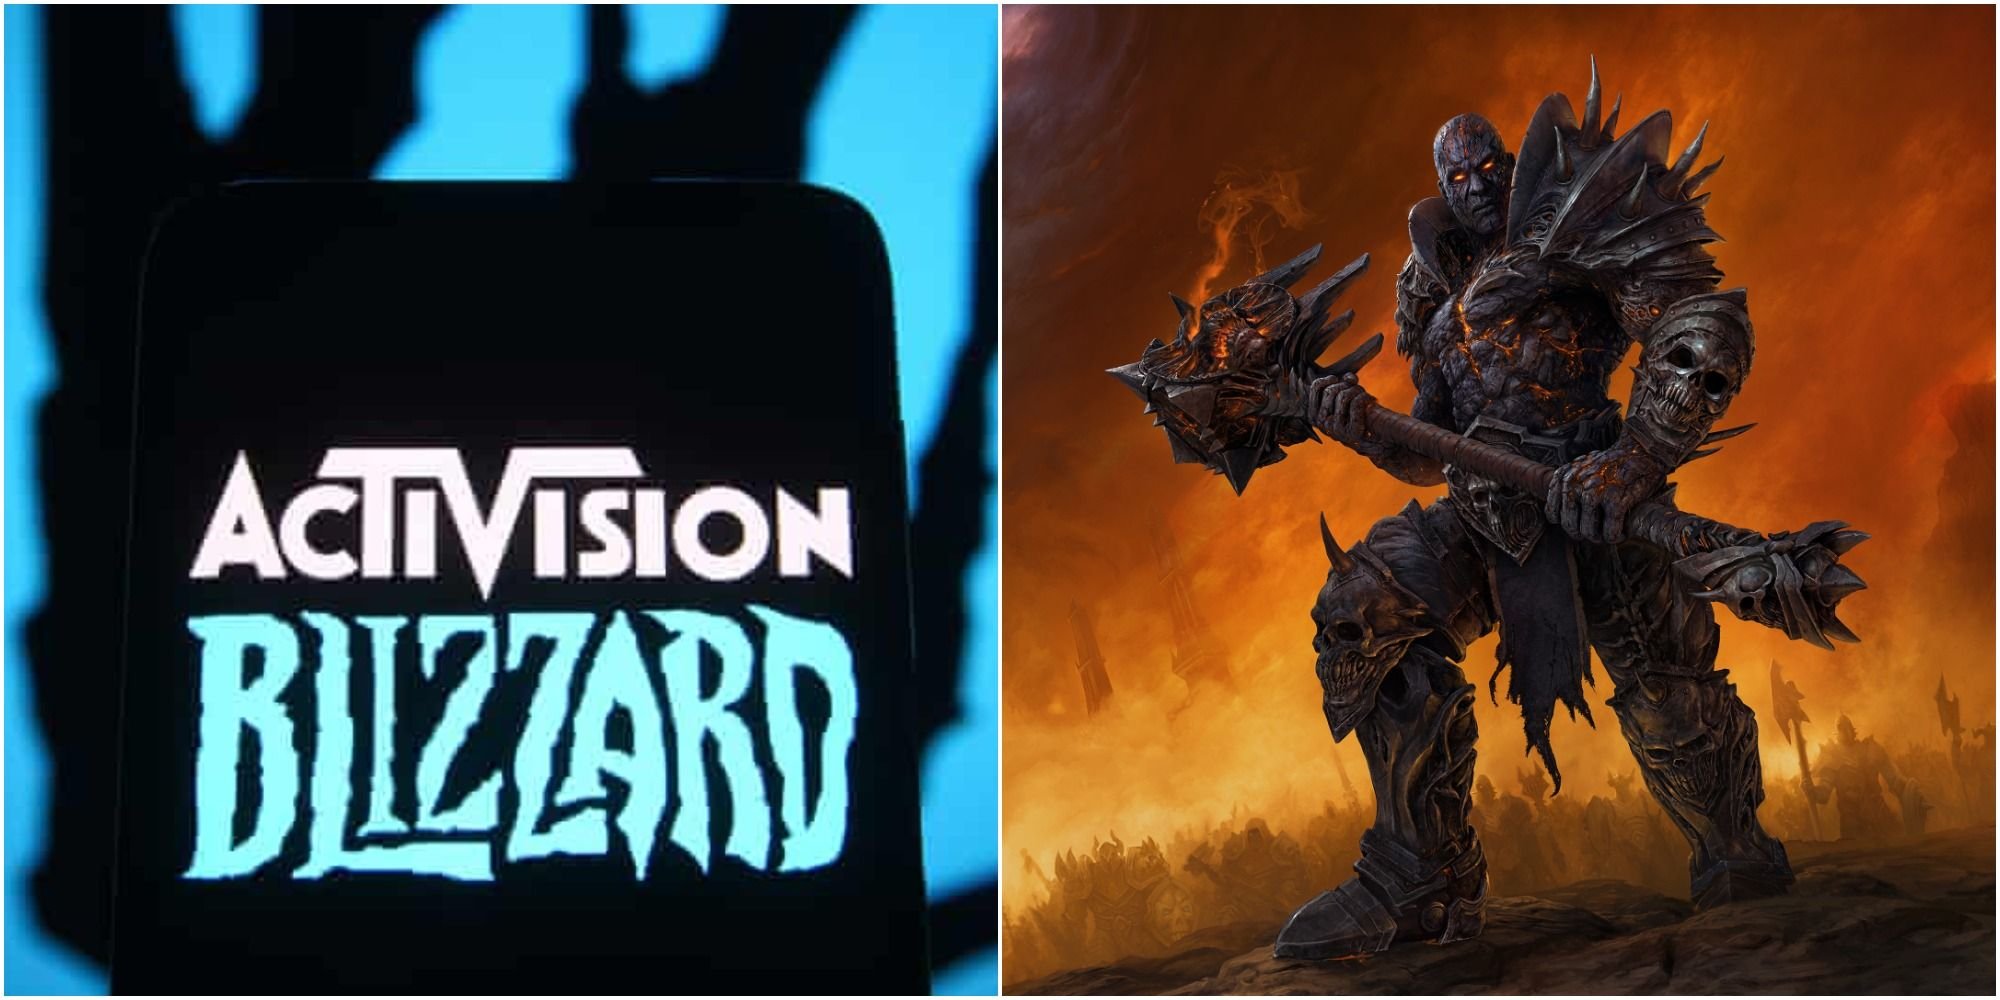 World Of Warcraft Players Protest Against Activision Blizzard In-Game